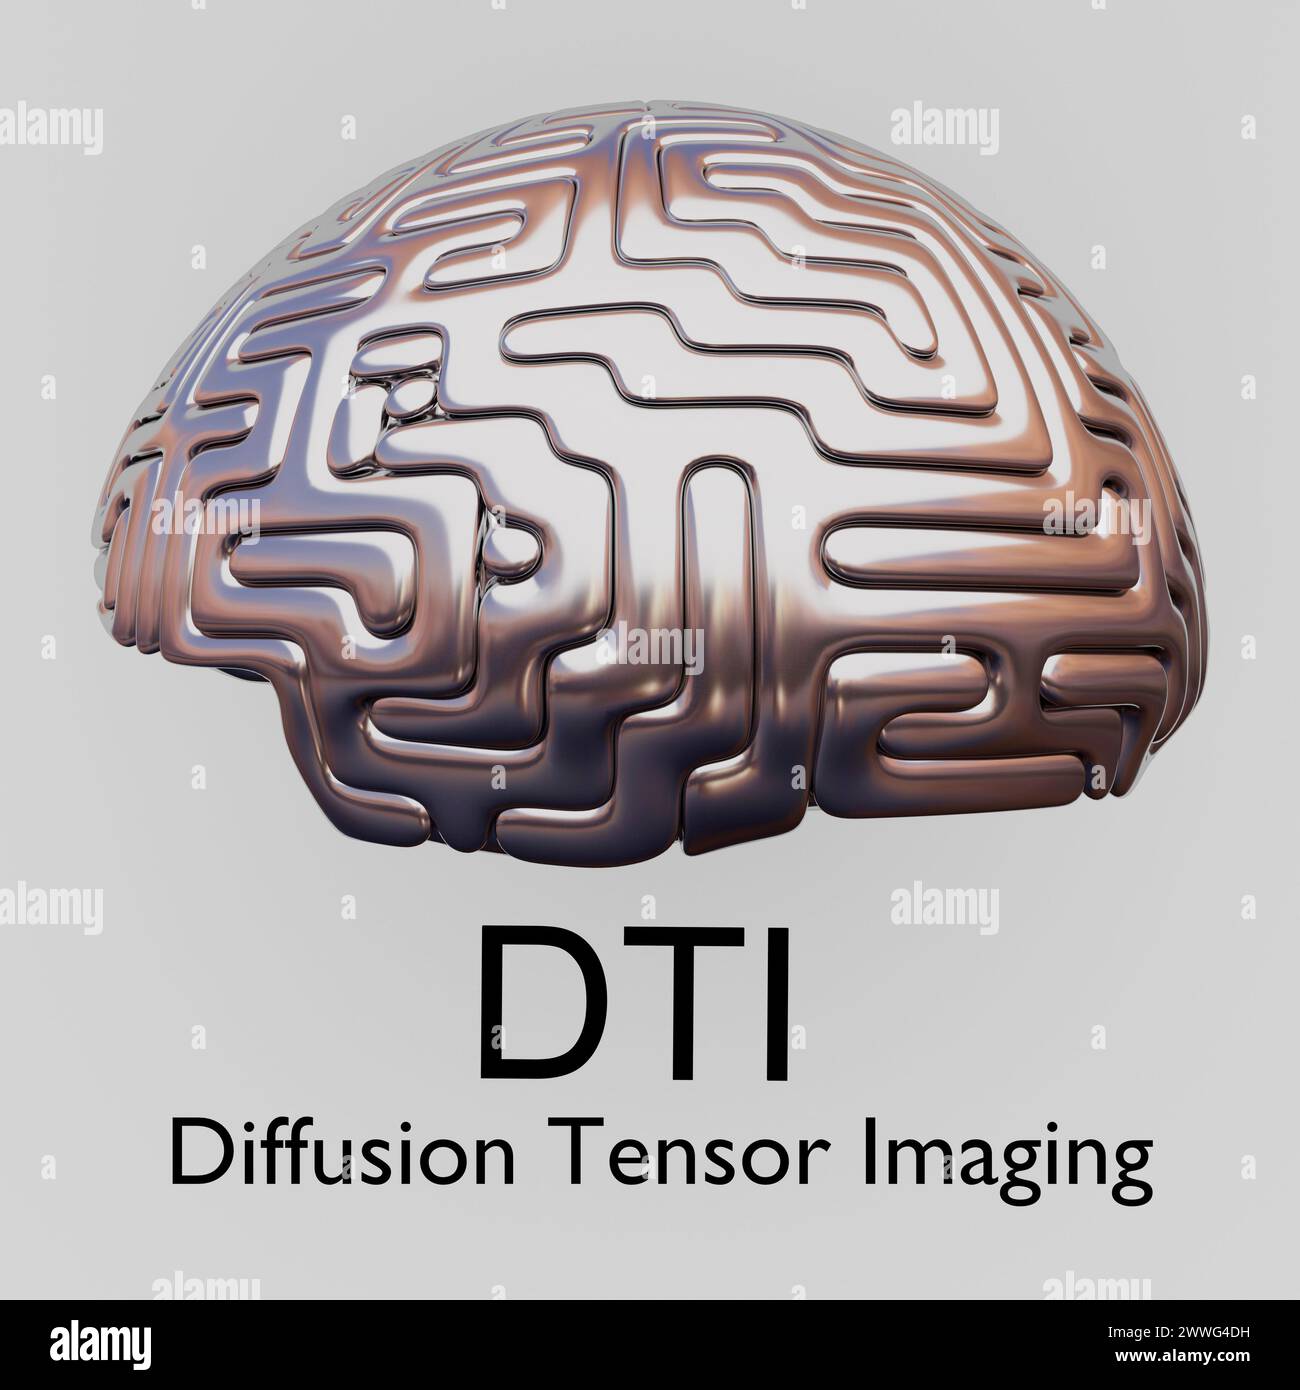 3D illustration of a human brain, titled as DTI - Diffusion Tensor Imaging. Stock Photo